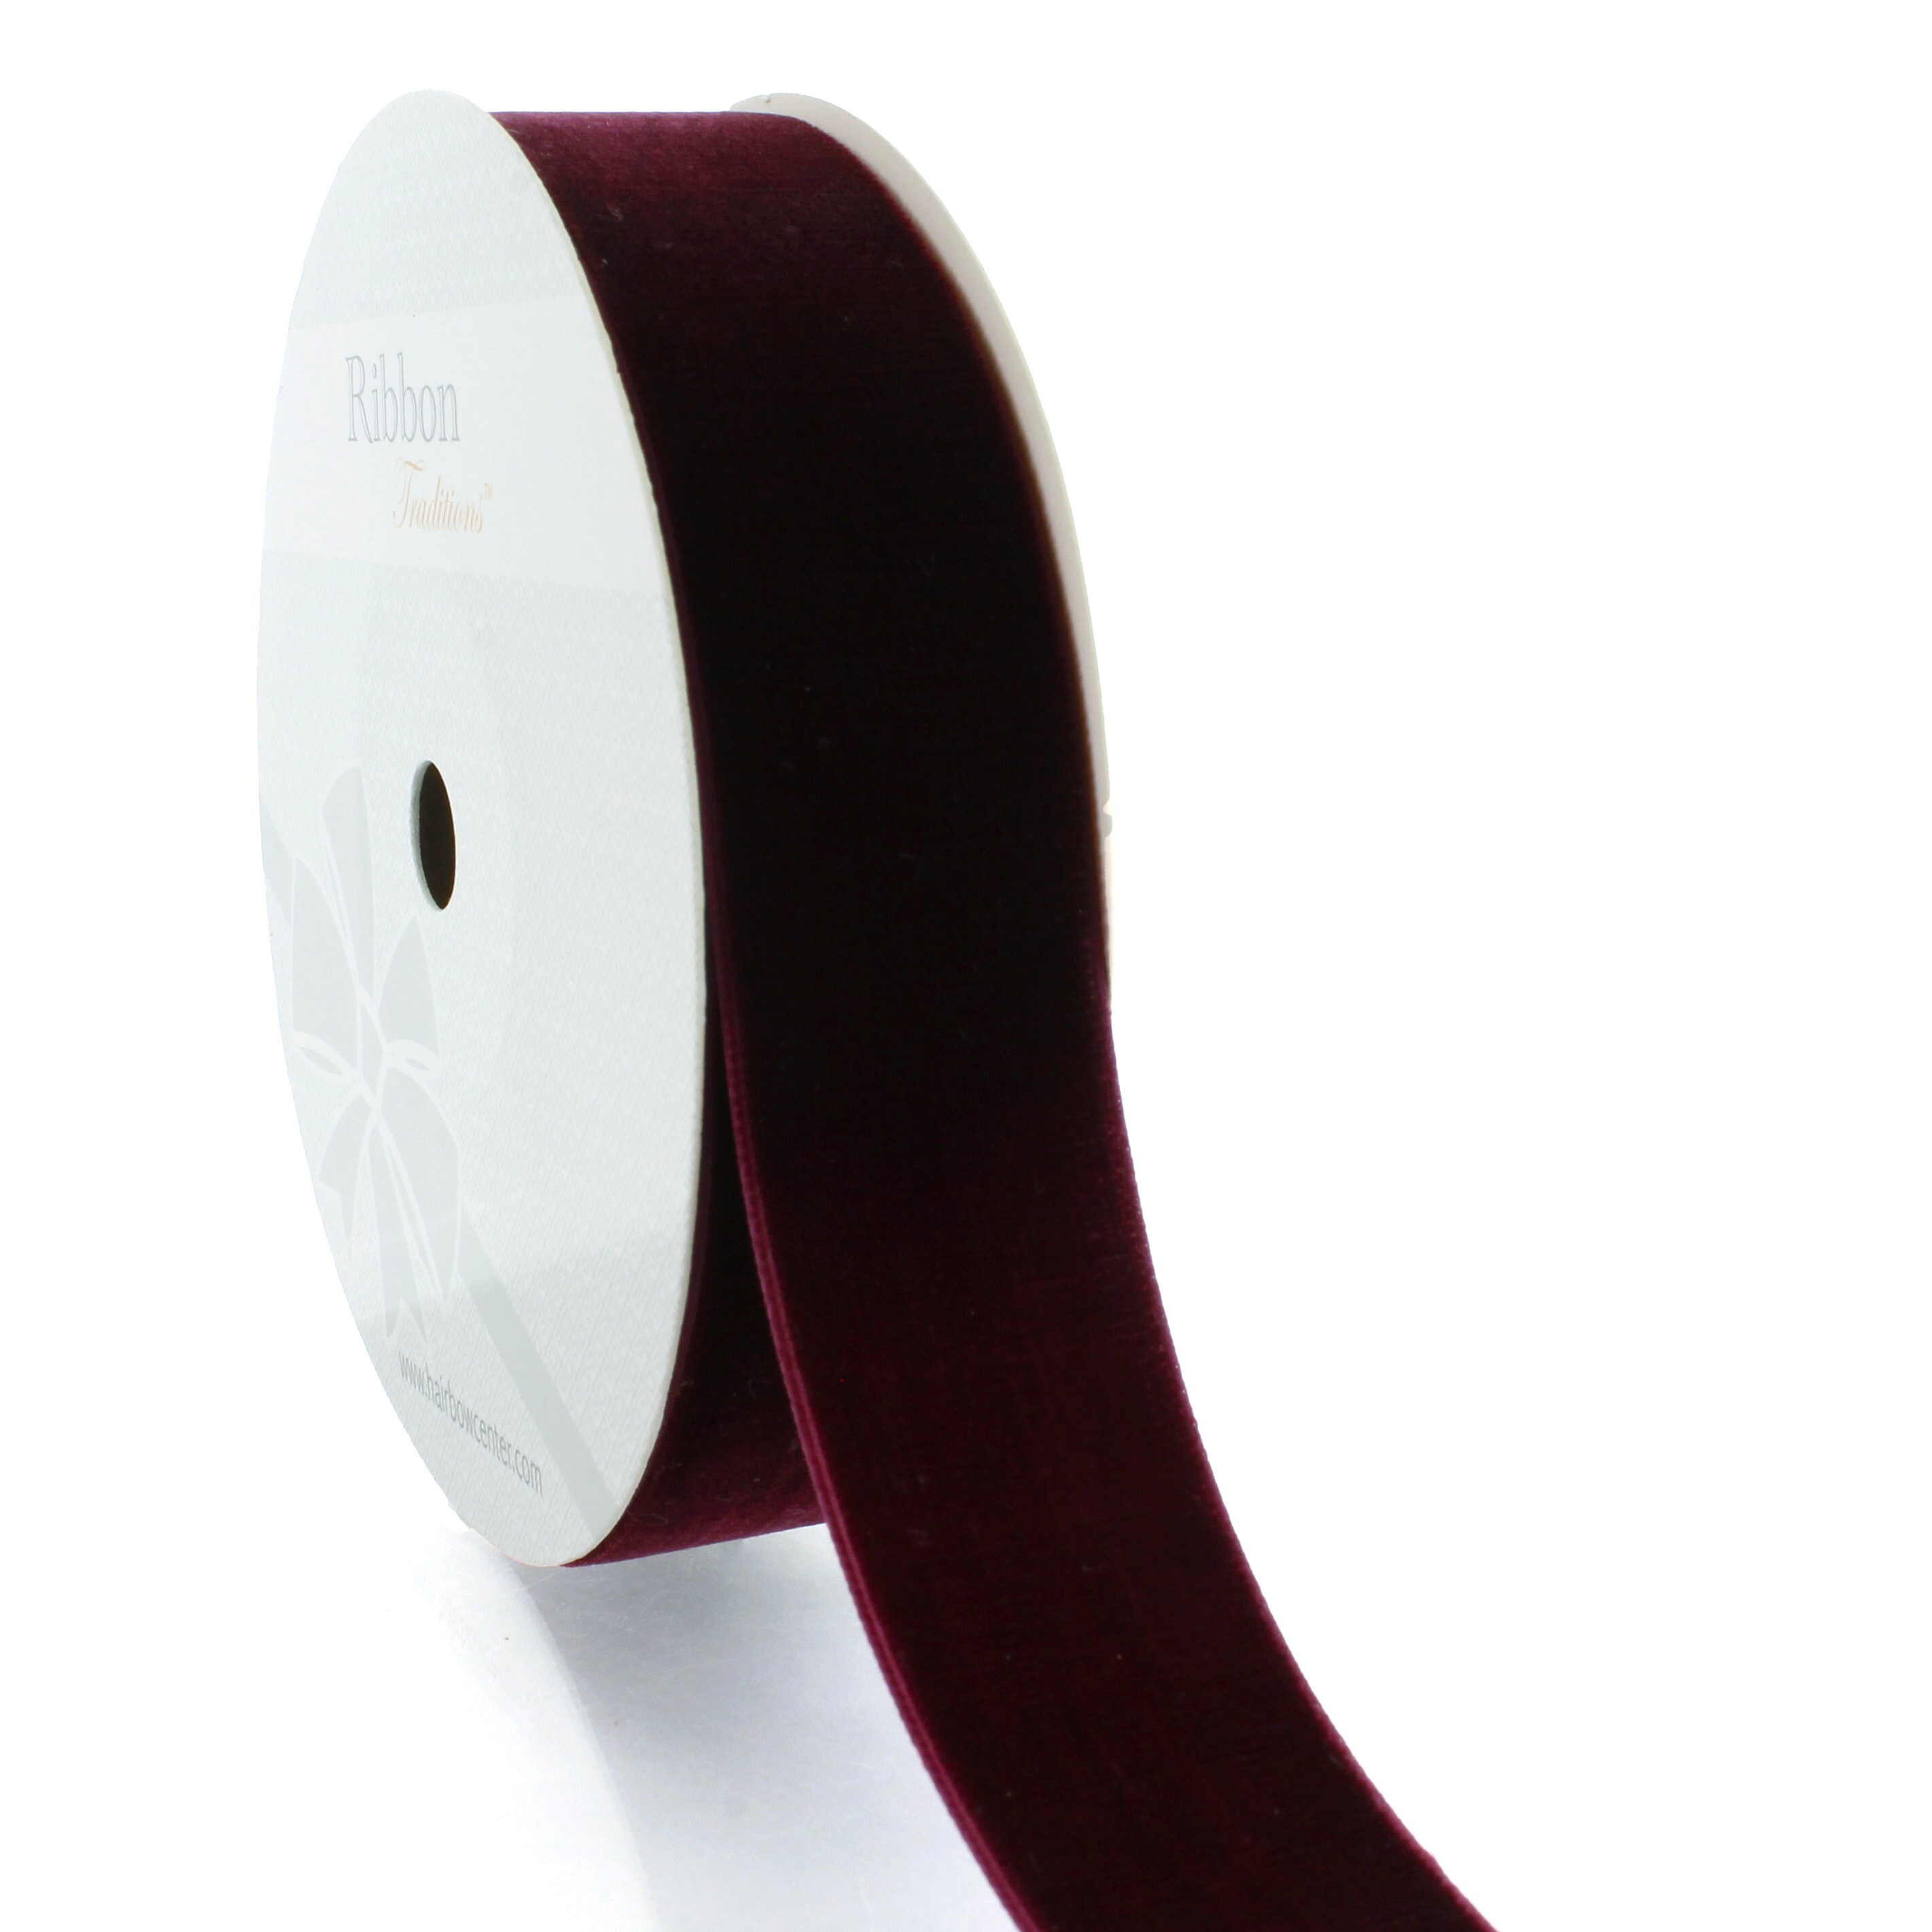 Wired In/Outdoor Velvet Ribbon 2 inch 50 yards Bordeaux